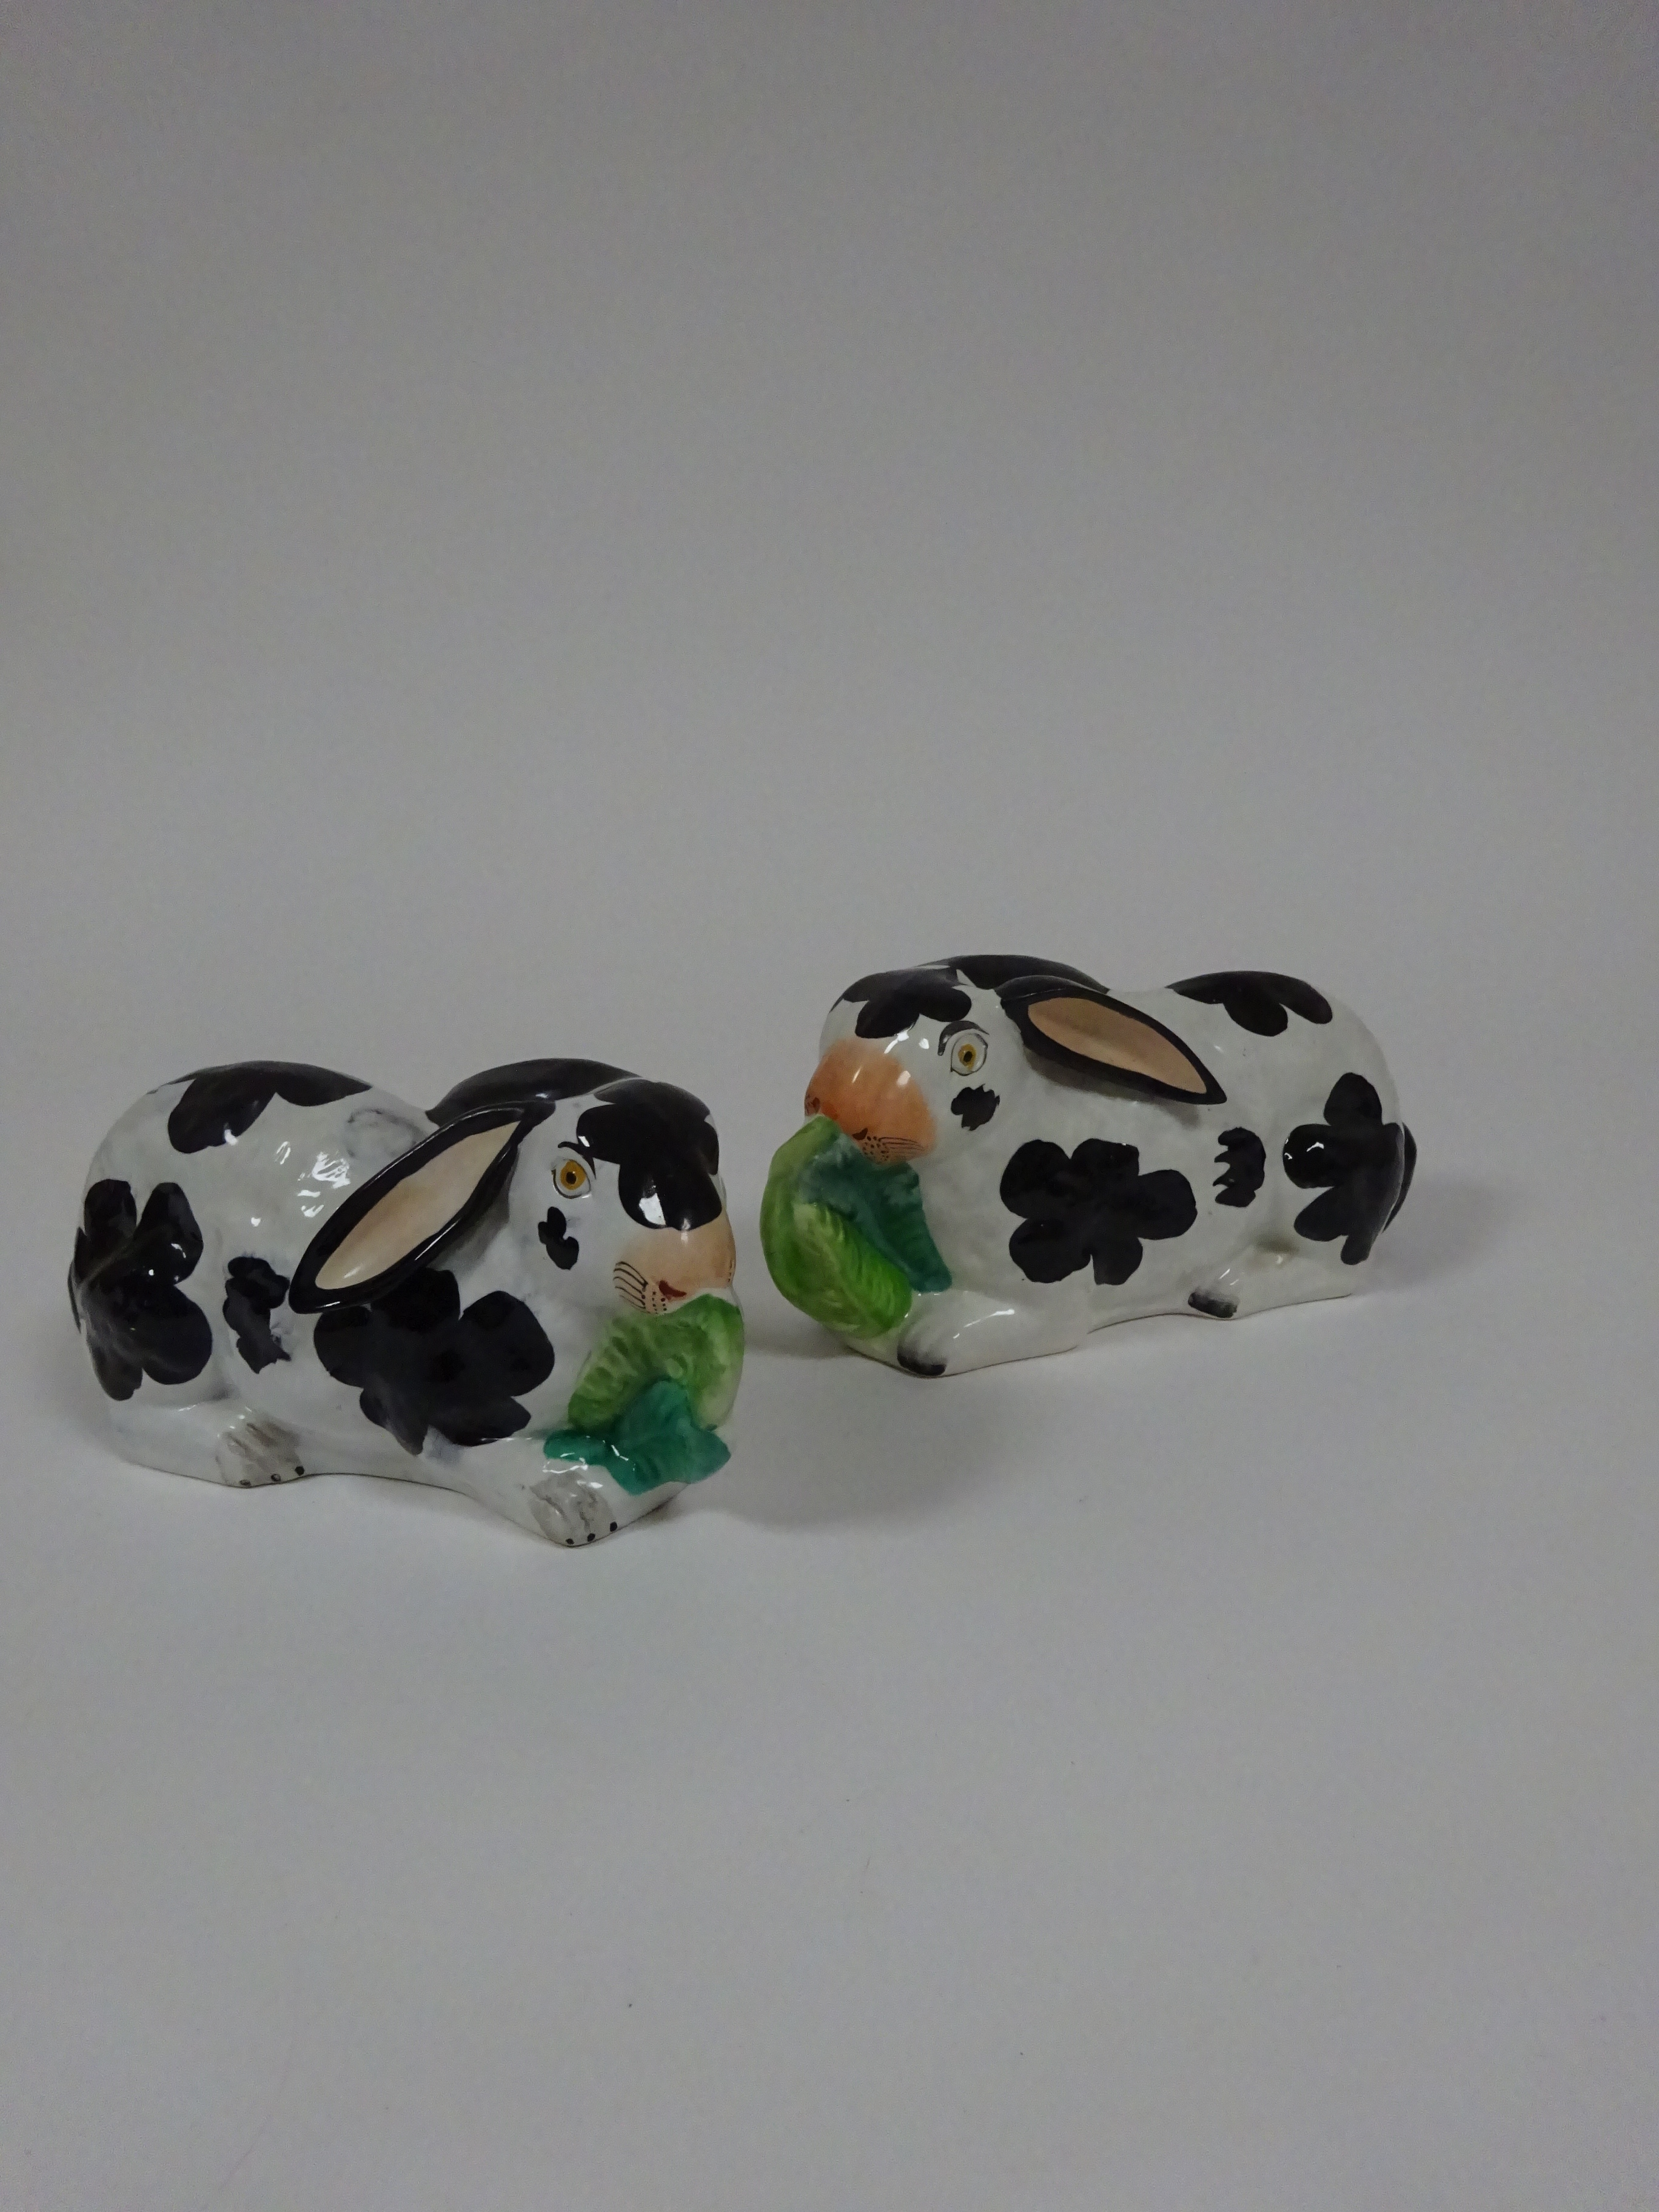 A PAIR OF STAFFORDSHIRE POTTERY MODELS OF RABBITS C.1860 each with black spotted markings and - Image 2 of 18